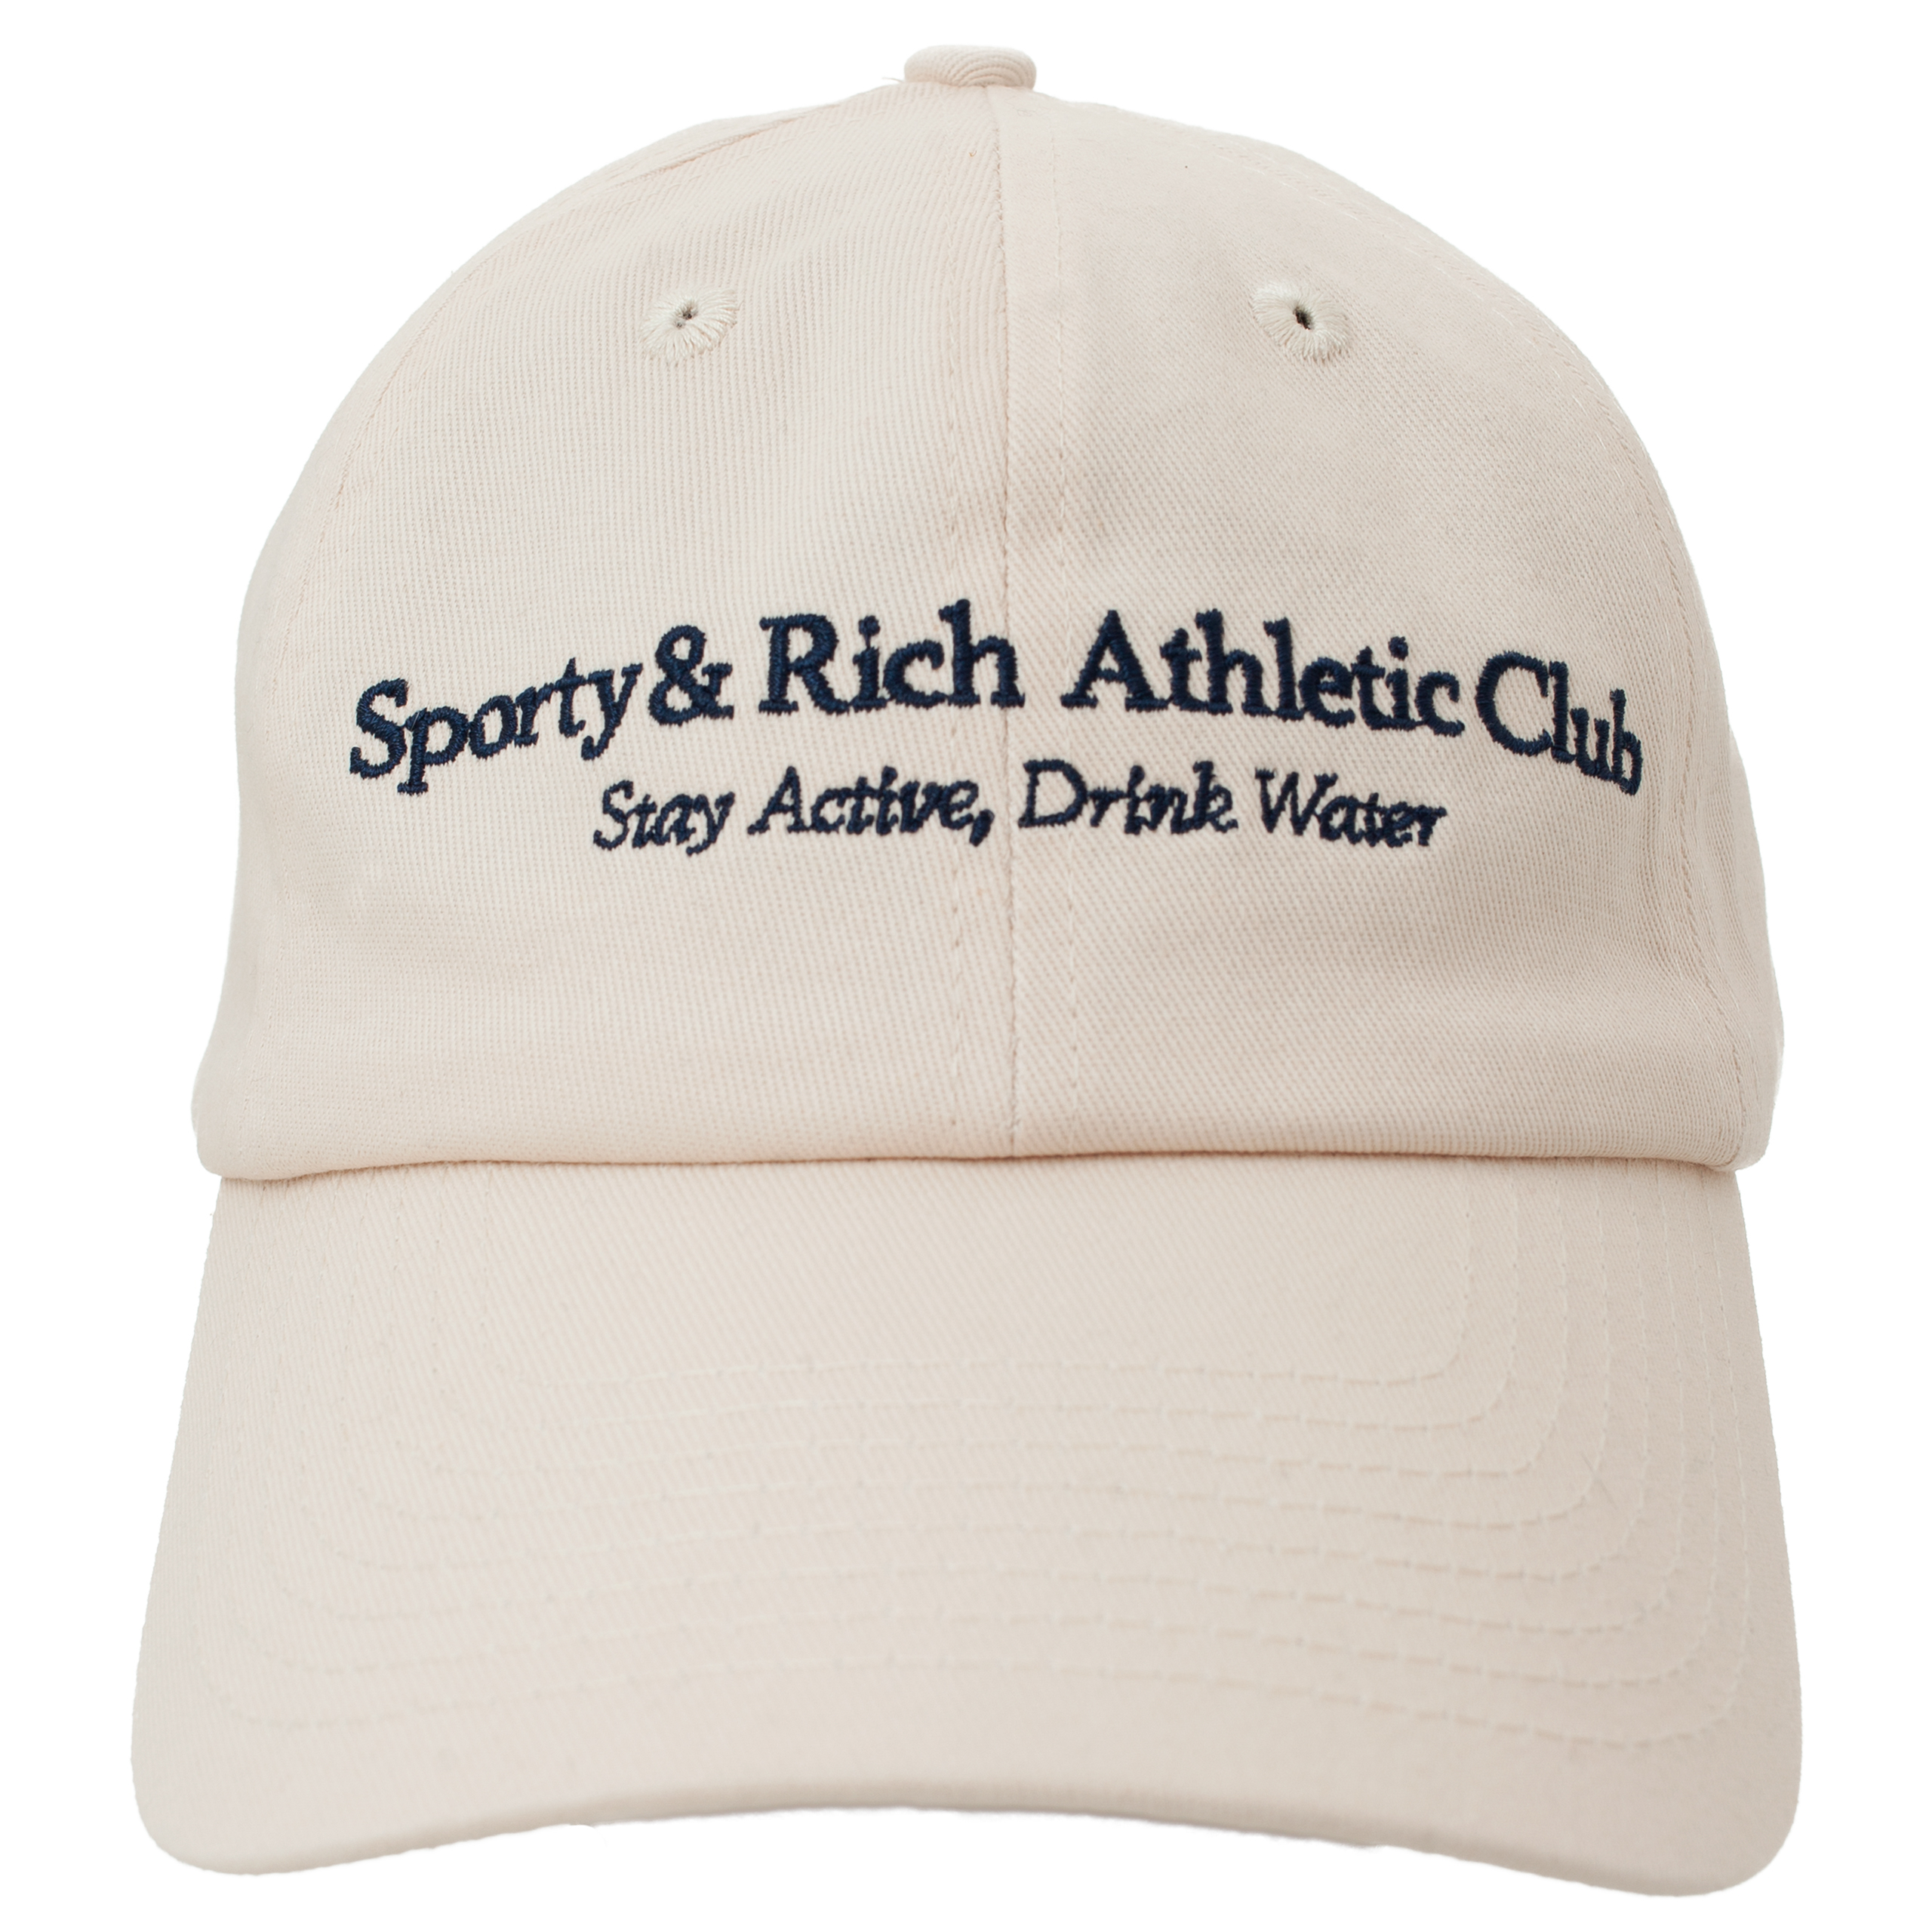 Кепка с вышивкой Athletic Club SPORTY & RICH AC841CR, размер One Size